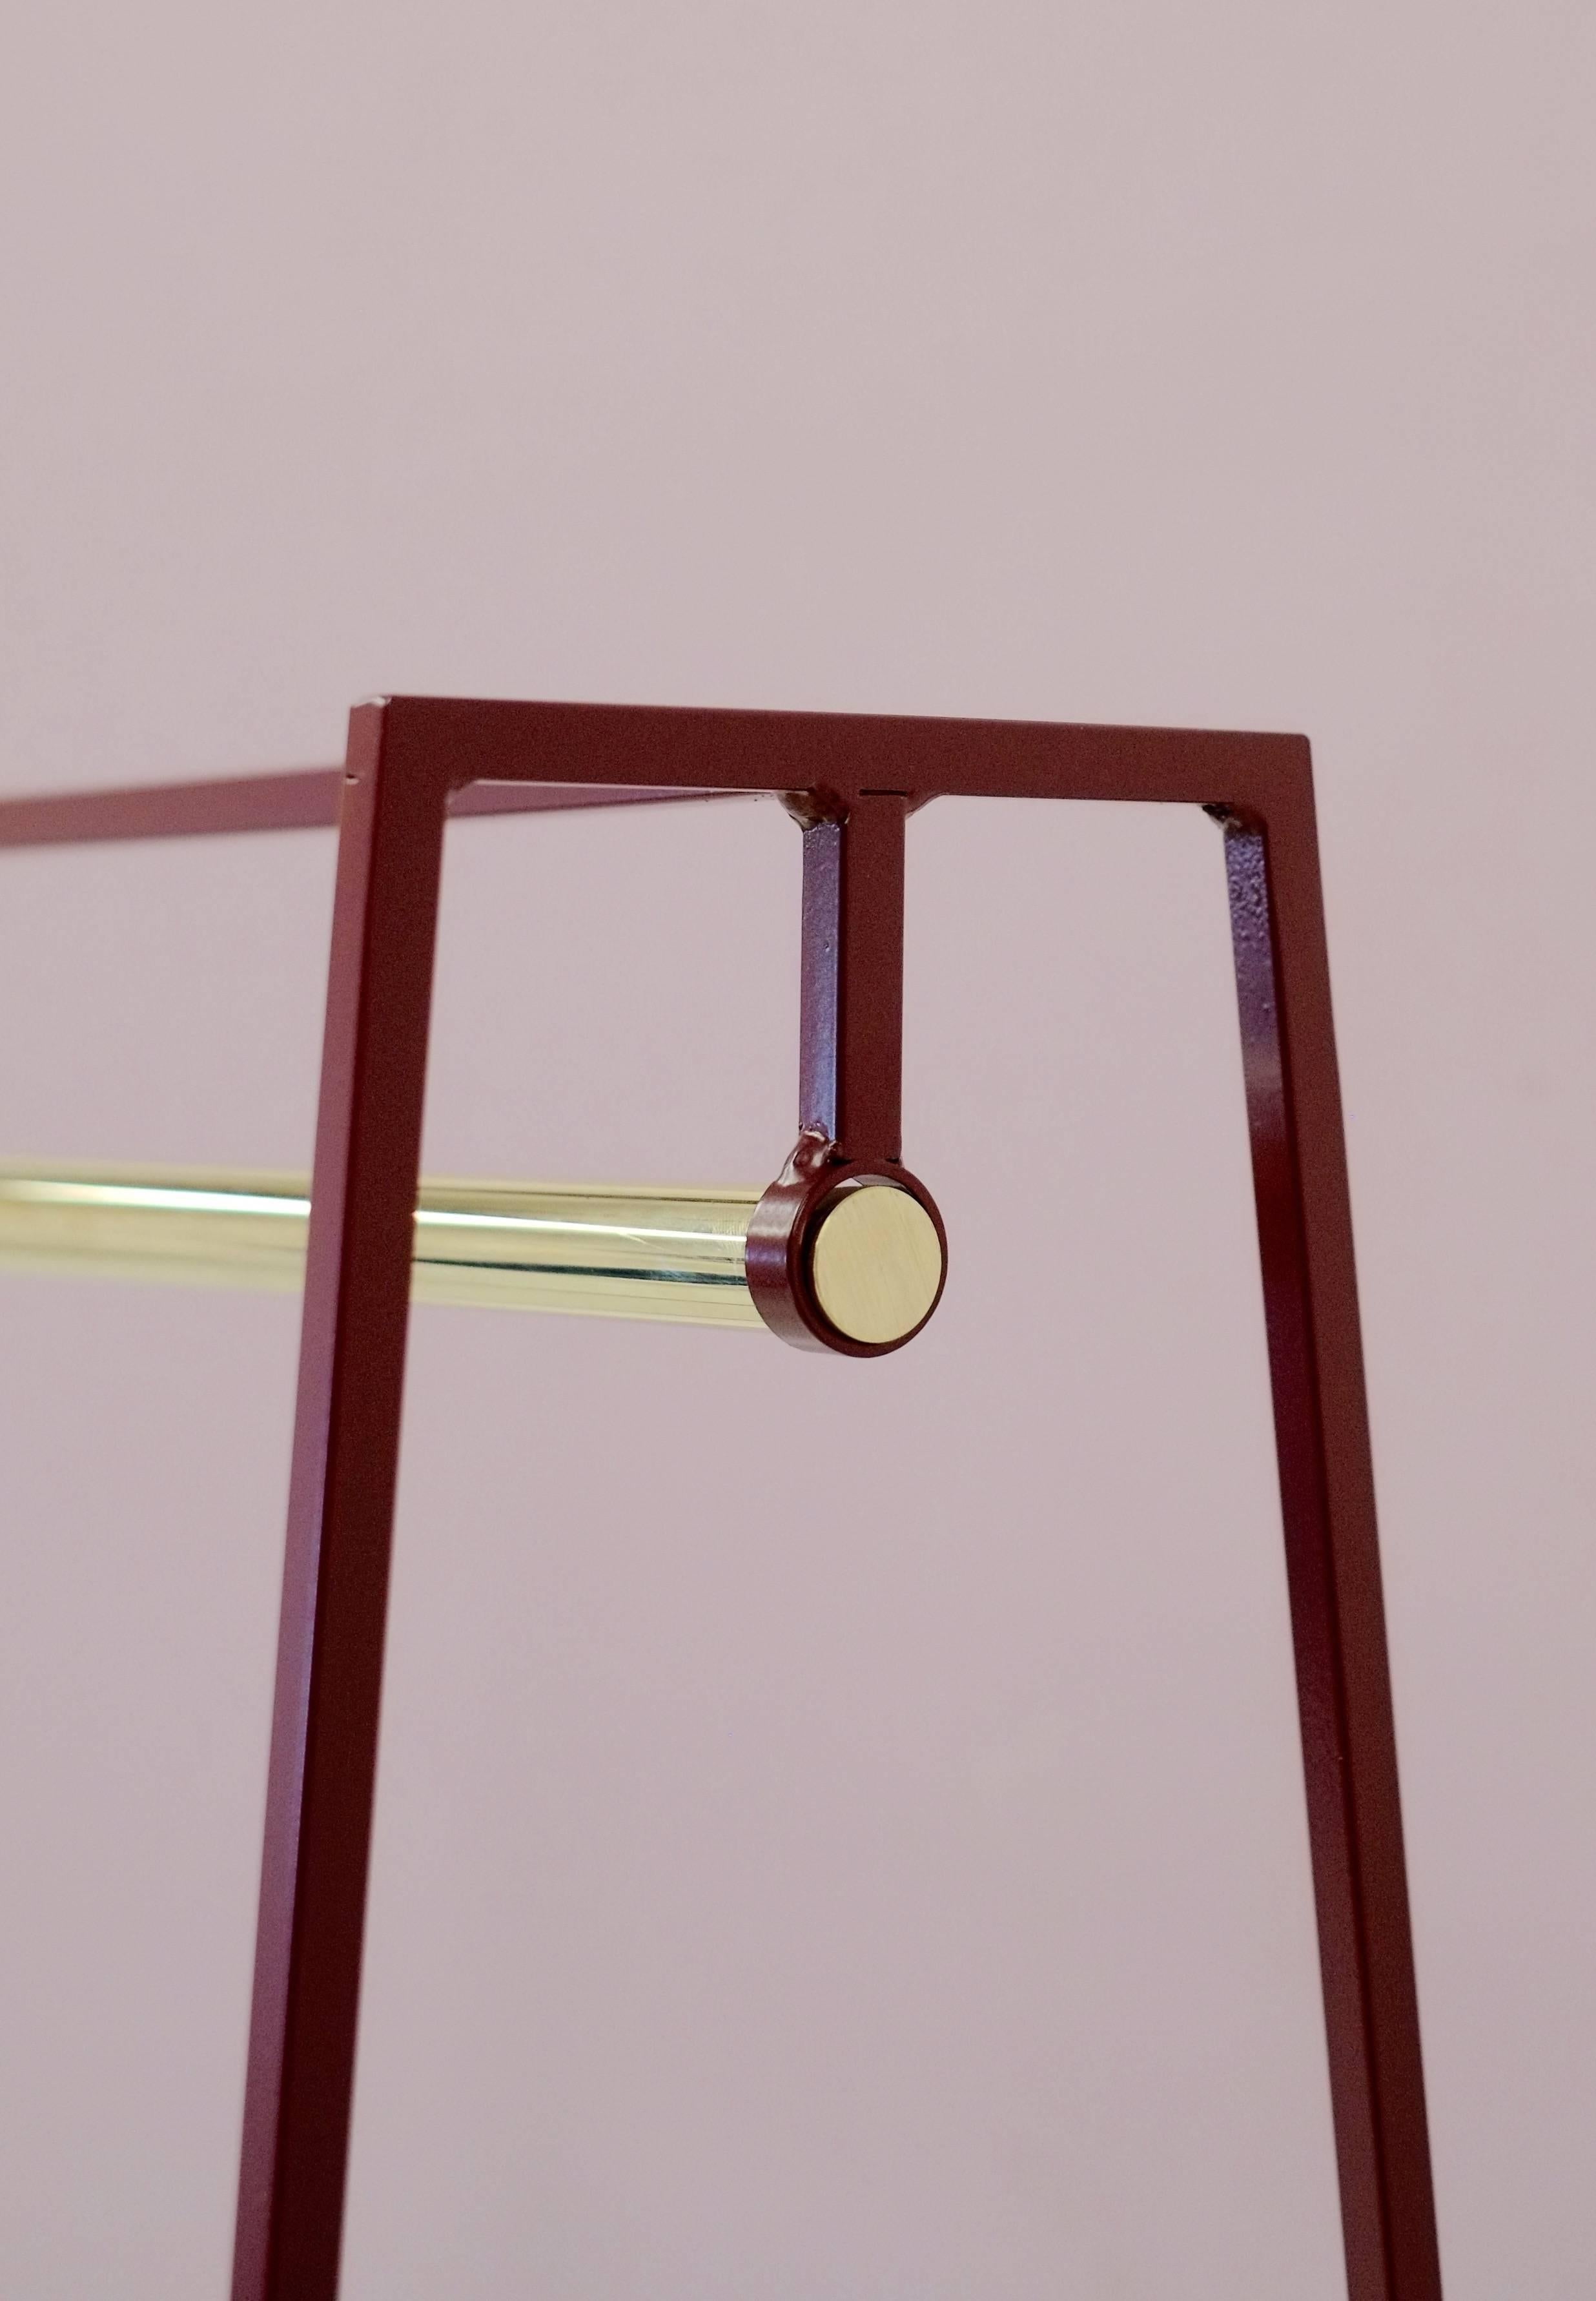 The steel slimline 'A' clothes rail is one of &New's signature pieces. A stunning addition to any bedroom or hallway, the minimal design looks delicate but is surprisingly robust. This one is powder coated in beetroot, but the clothes rail comes in